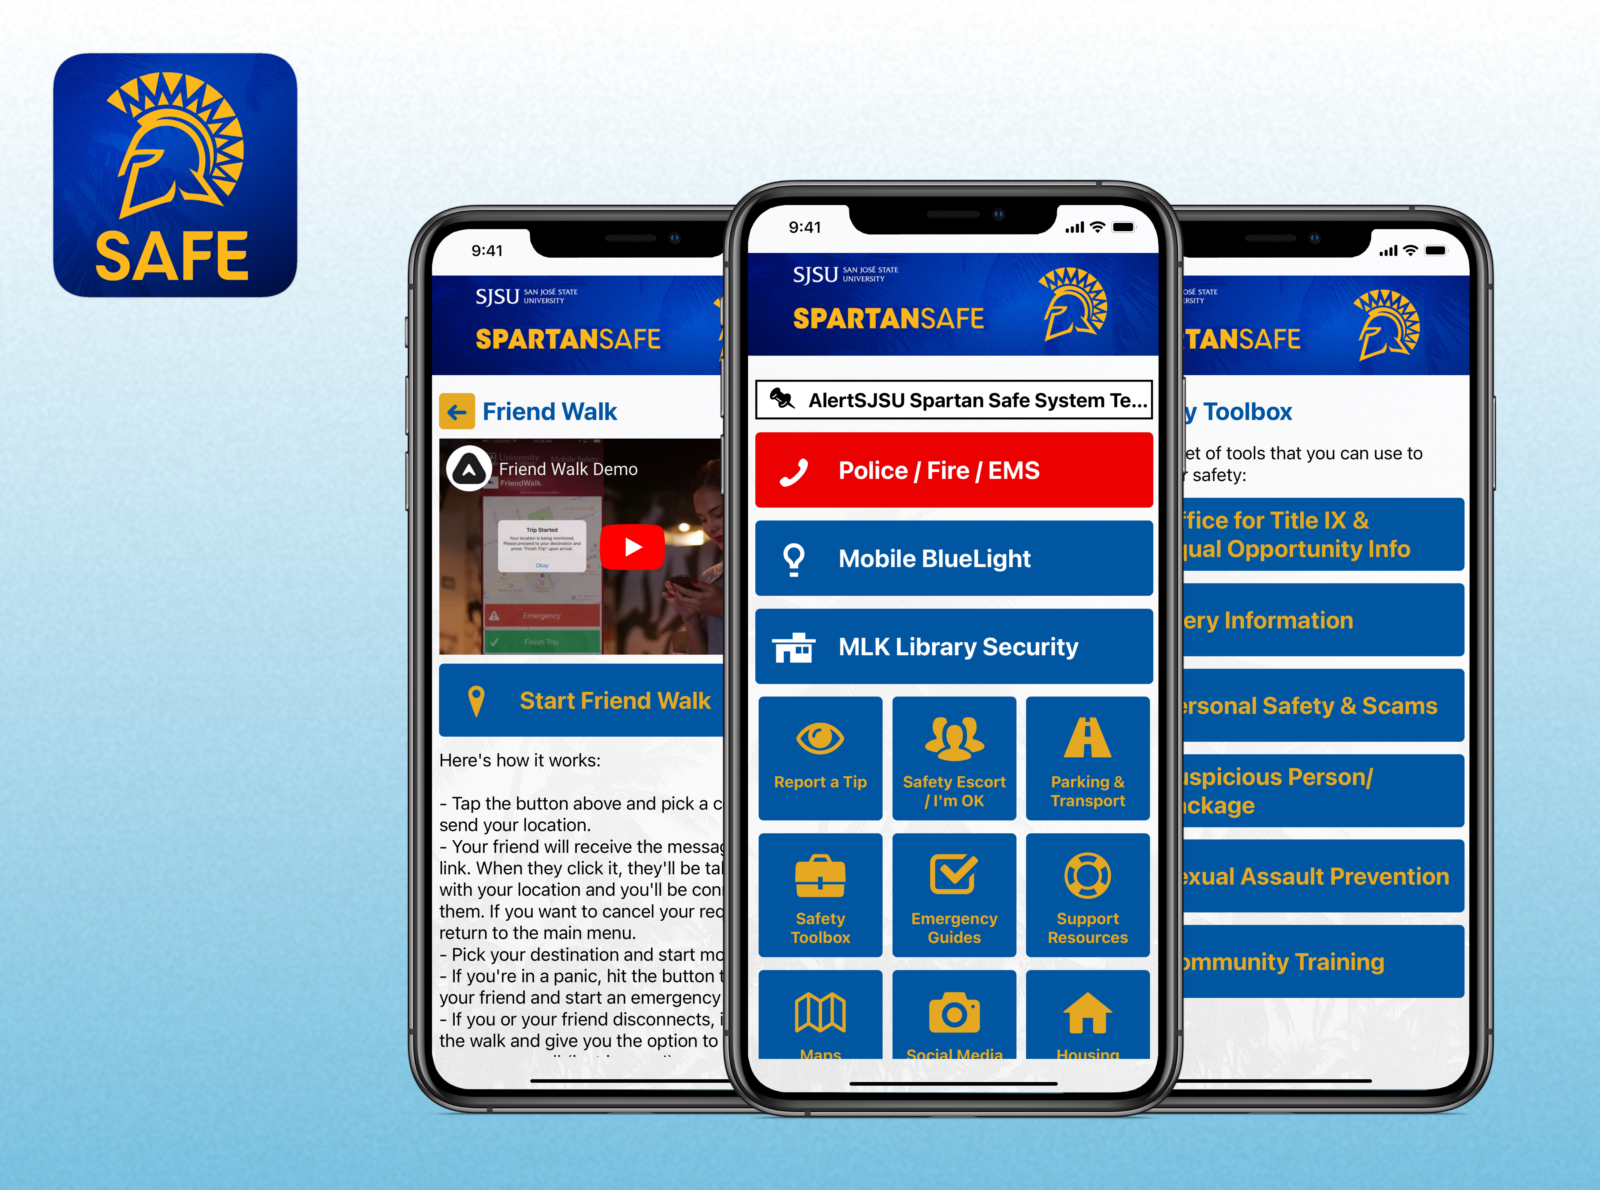 Visual demonstration of the Spartan Safe reporting and safety mobile applications.